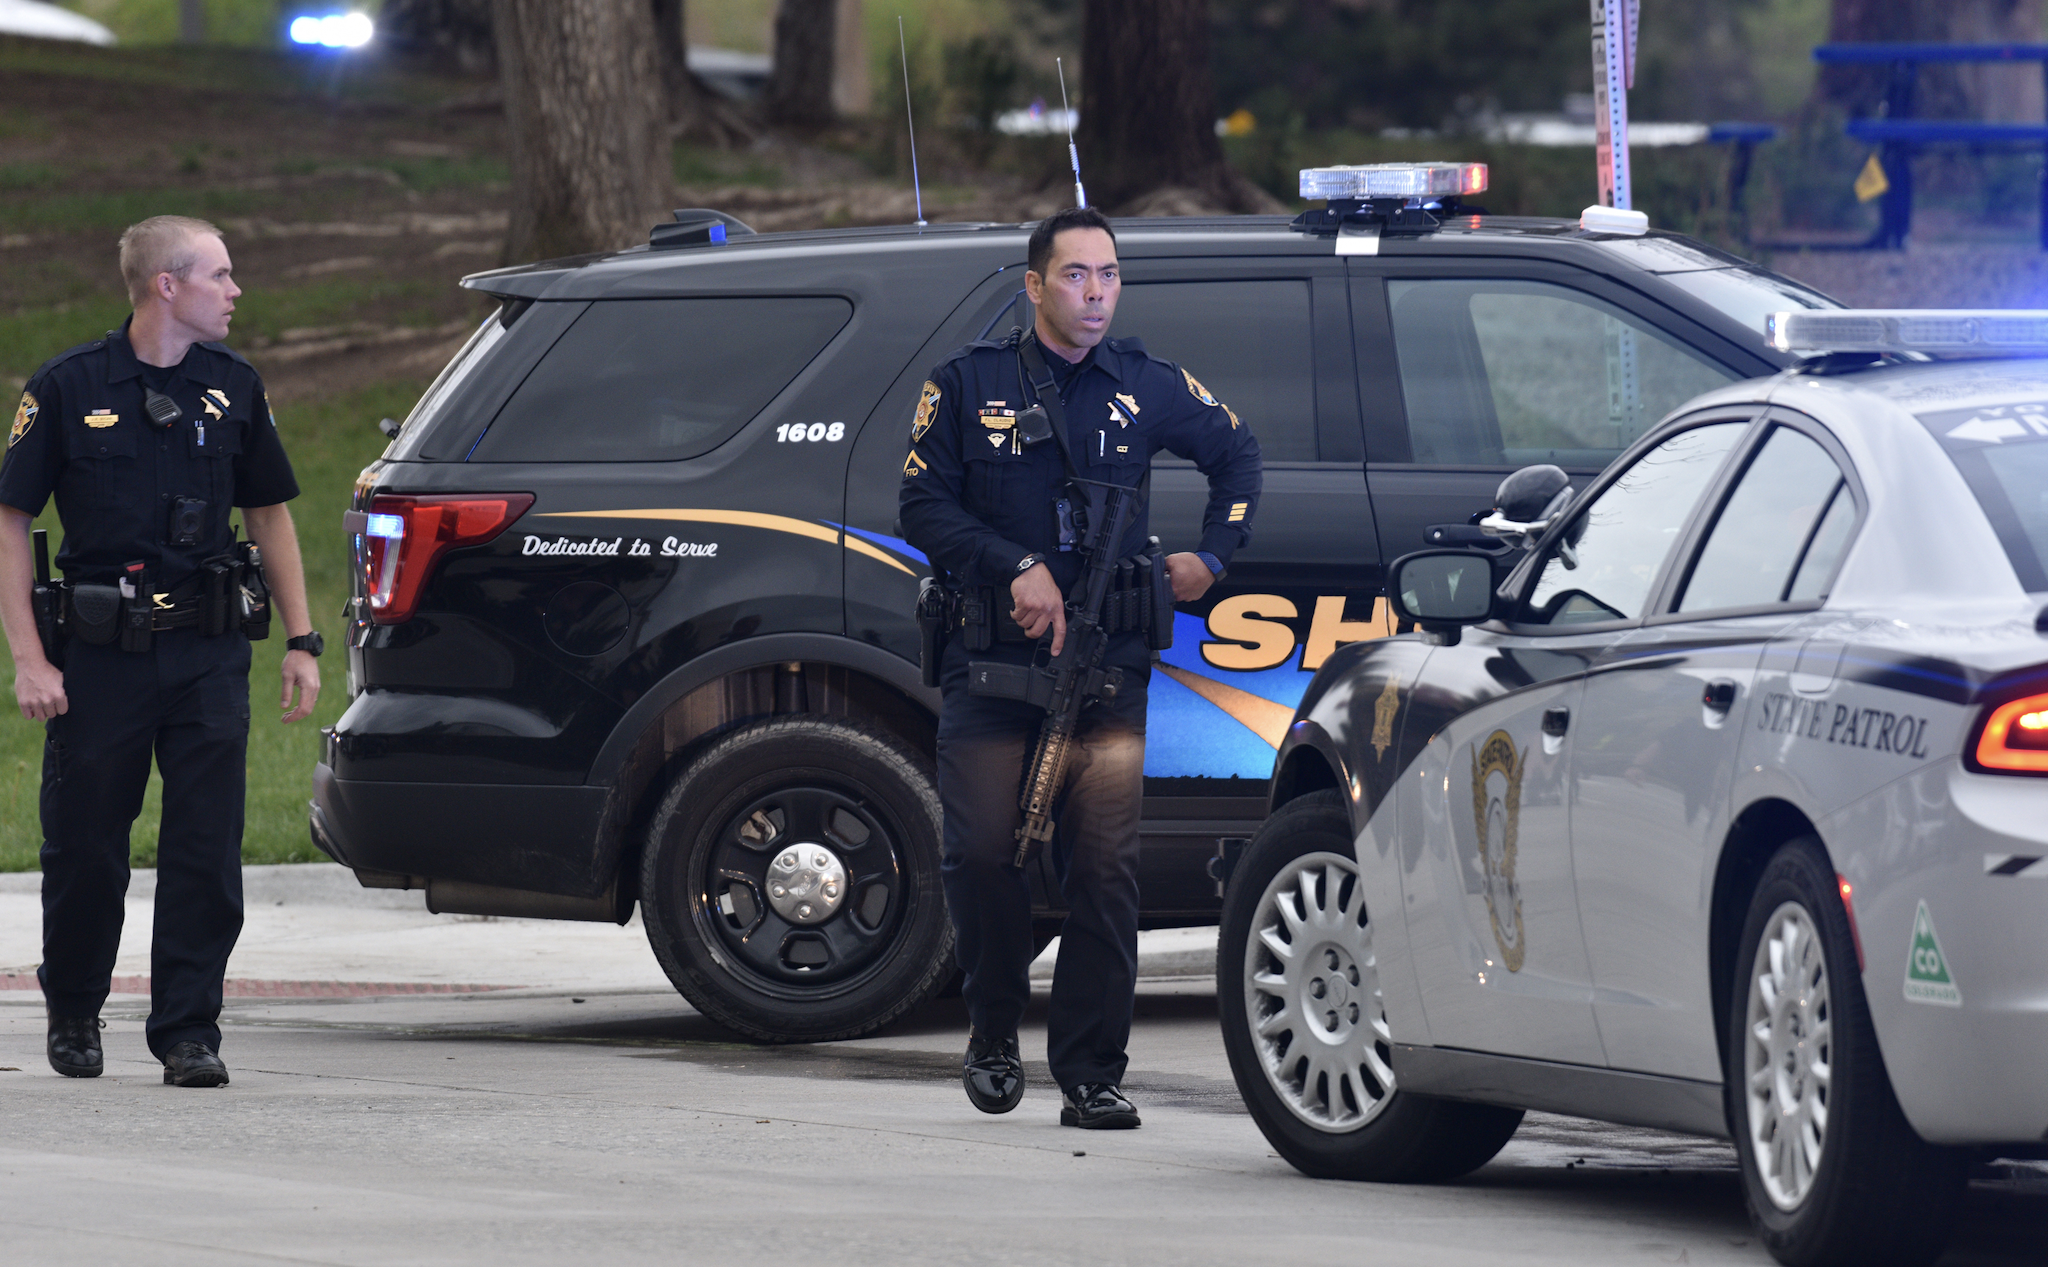 HIGHLANDS RANCH, COLORADO - MAY 07: Officers patrol the scene of a shooting in which at least seven students were injured at the STEM School Highlands Ranch on May 7, 2019 in Highlands Ranch, Colorado.